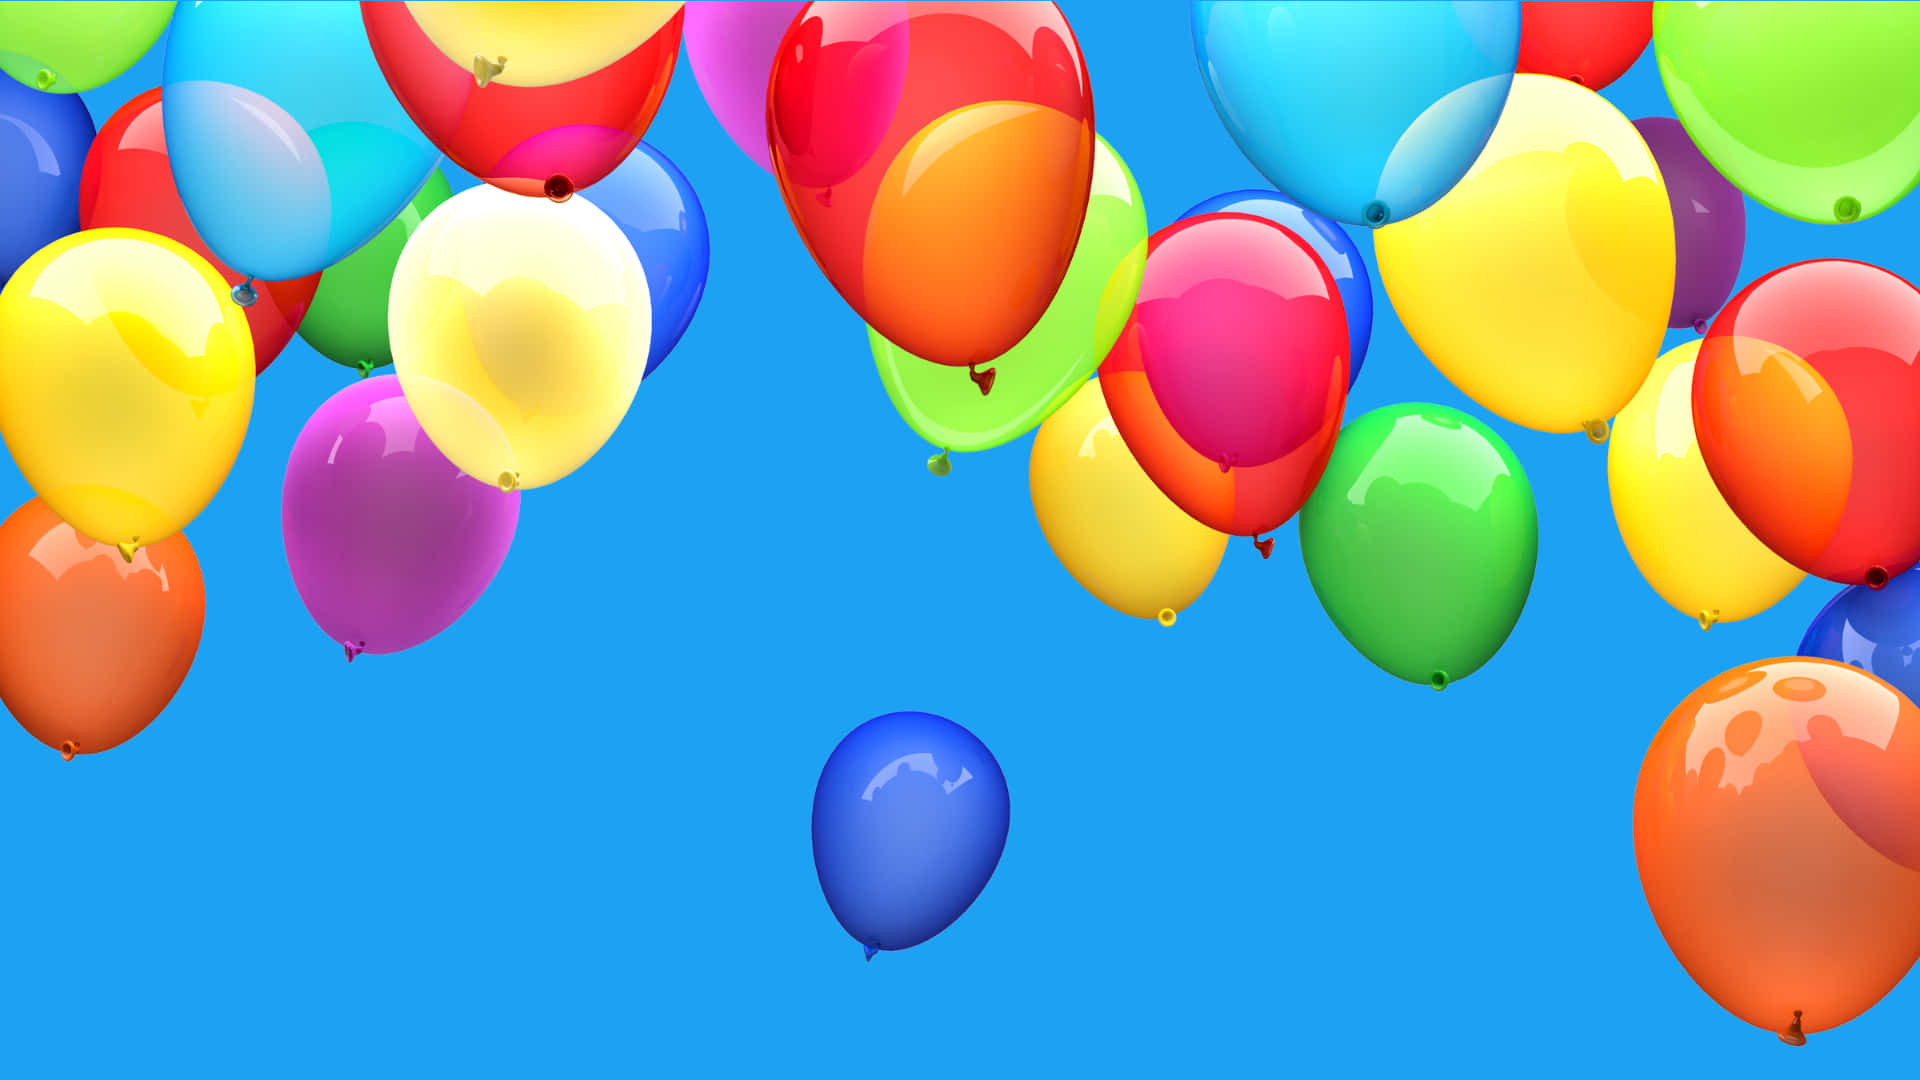 Celebrate your special day with colorful balloons.